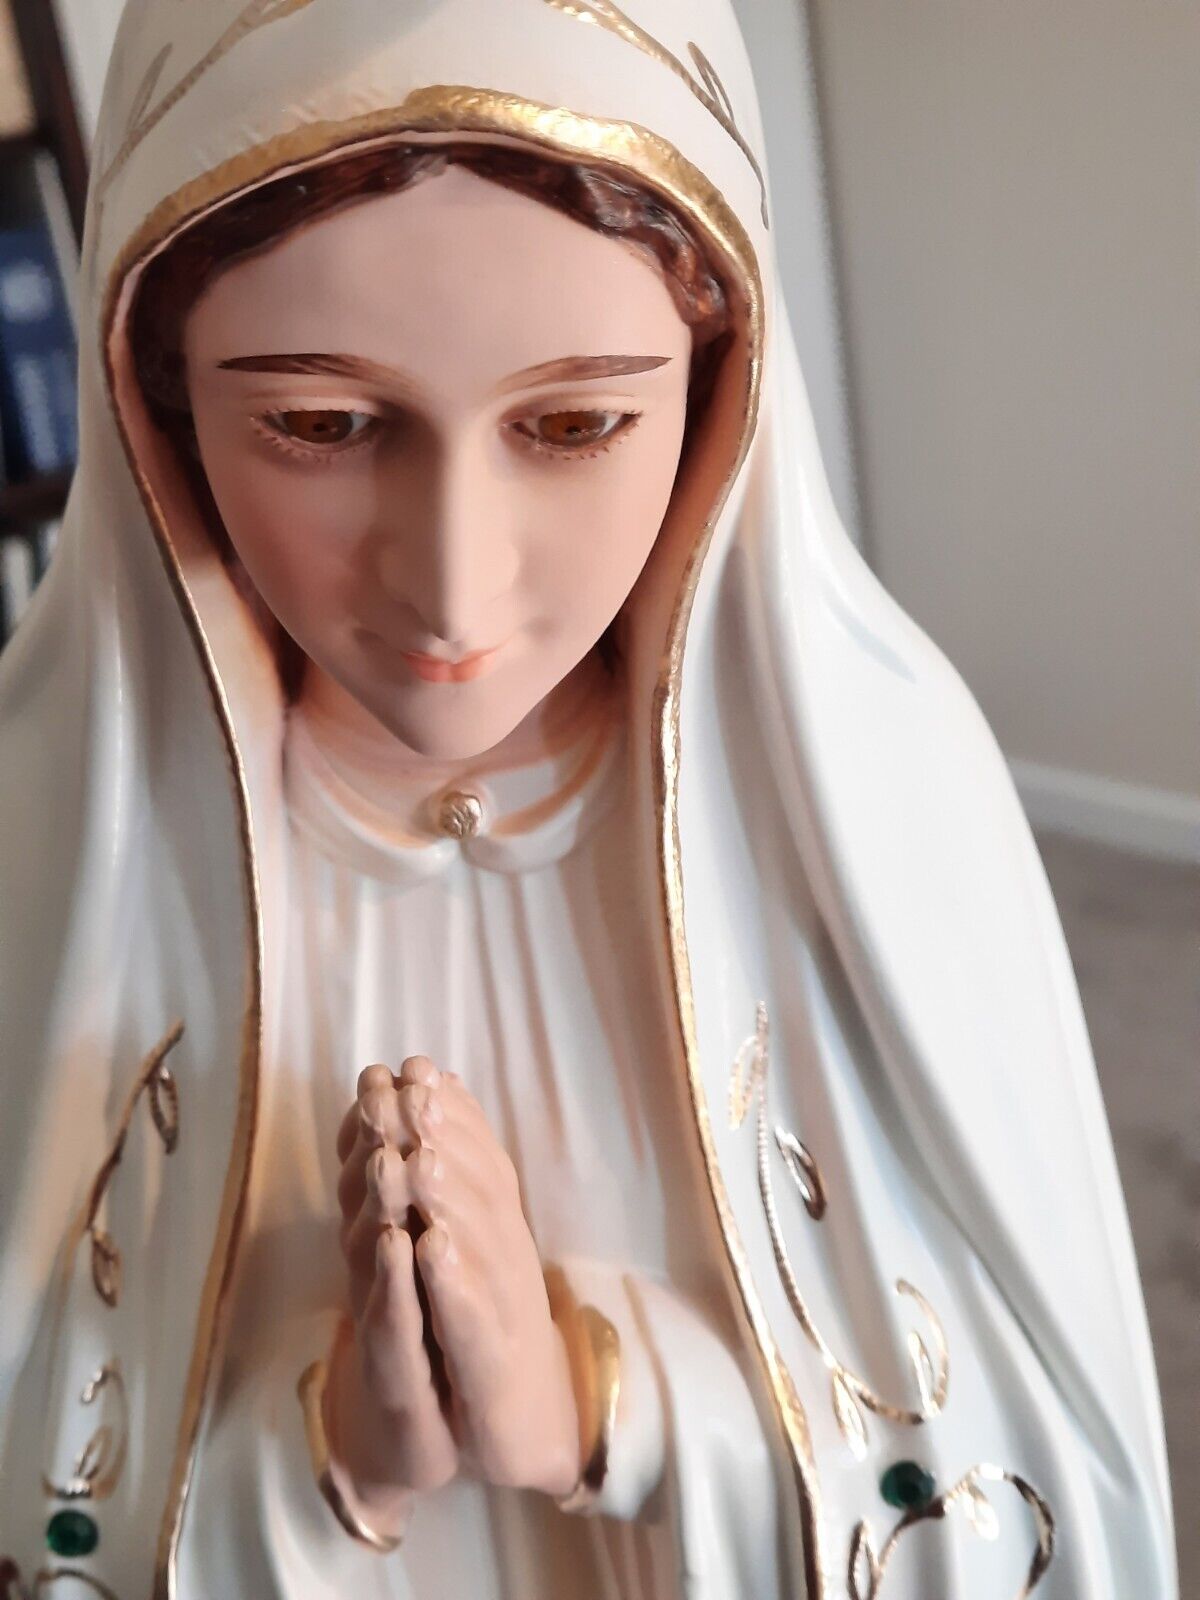 29.5 Inch Our Lady Of Fatima Virgin Mary Religious Statue Glass Eyes From Fatima